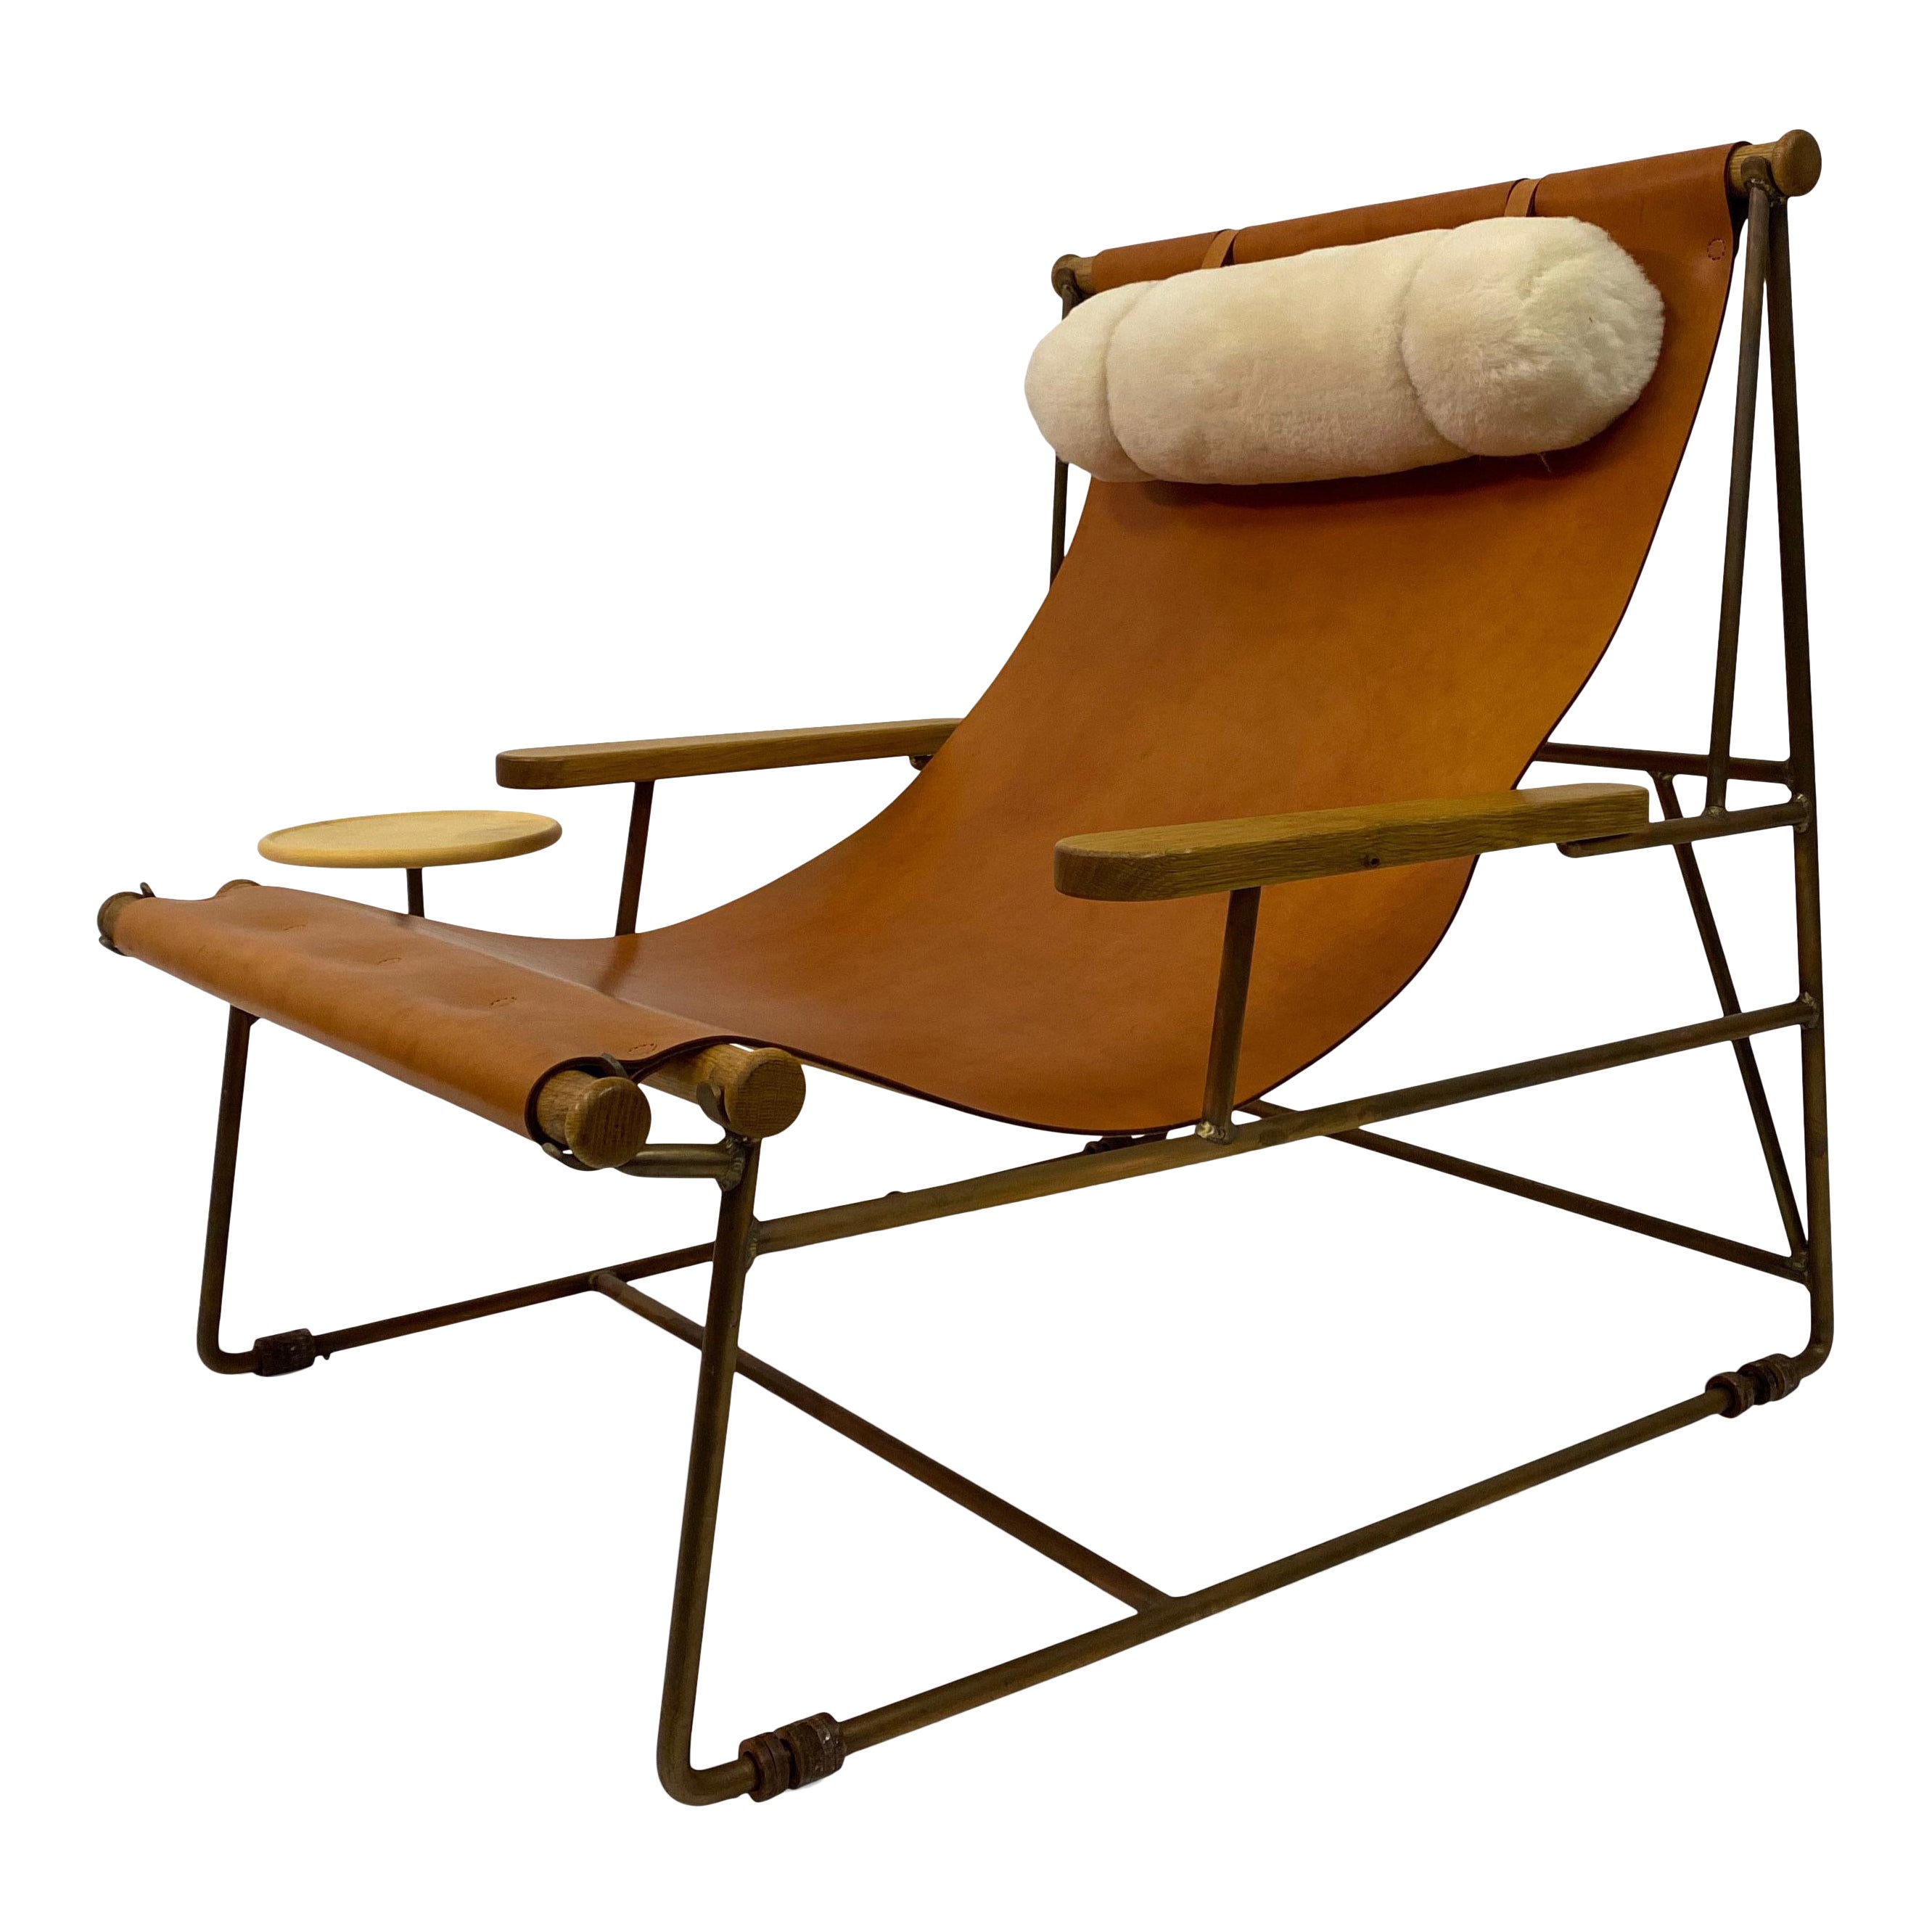 Leather Deck Lounge Chair by Tyler Hays for BDDW